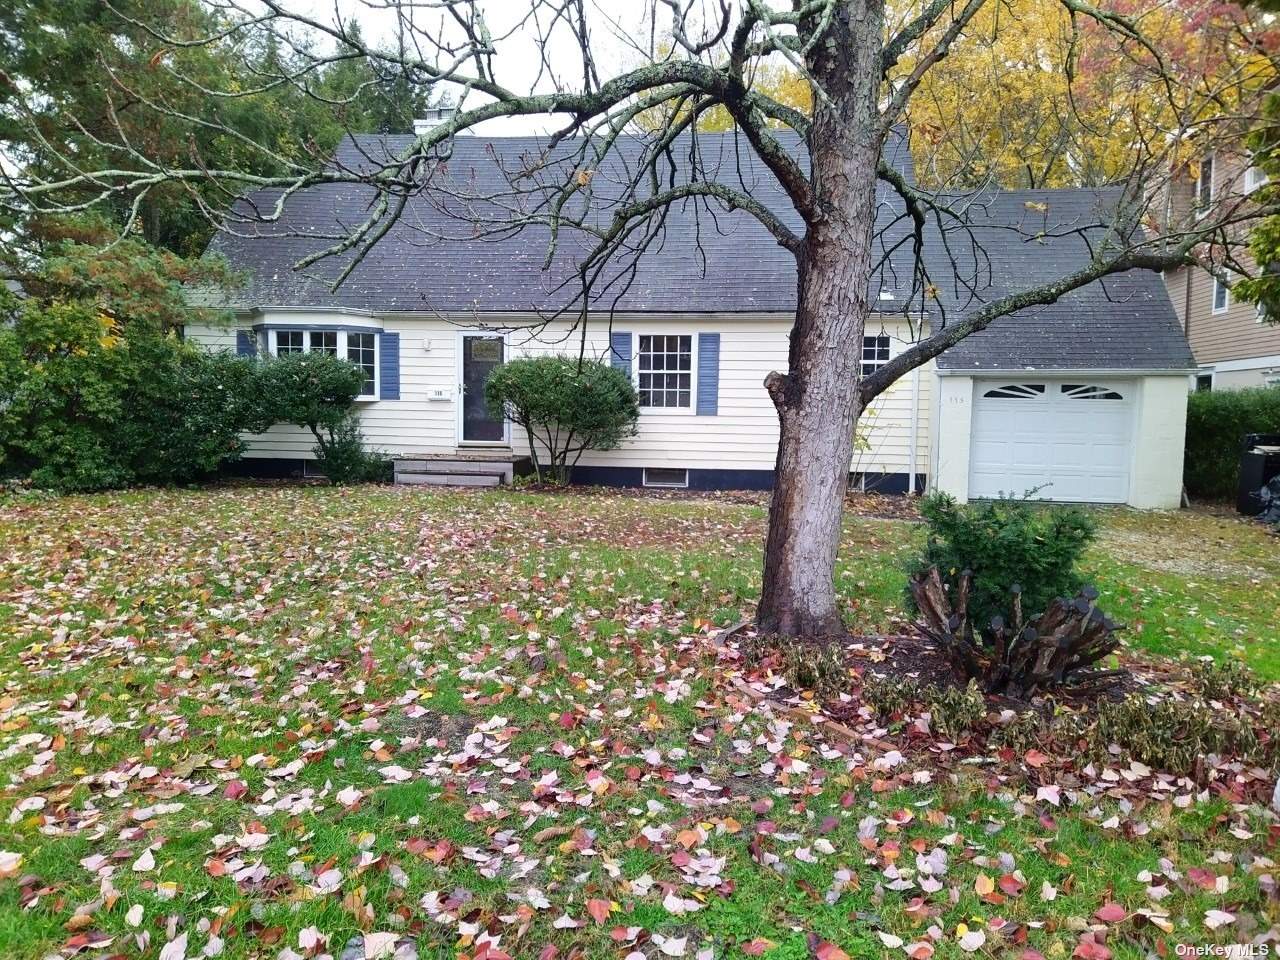 a view of a house with a small yard and a large tree